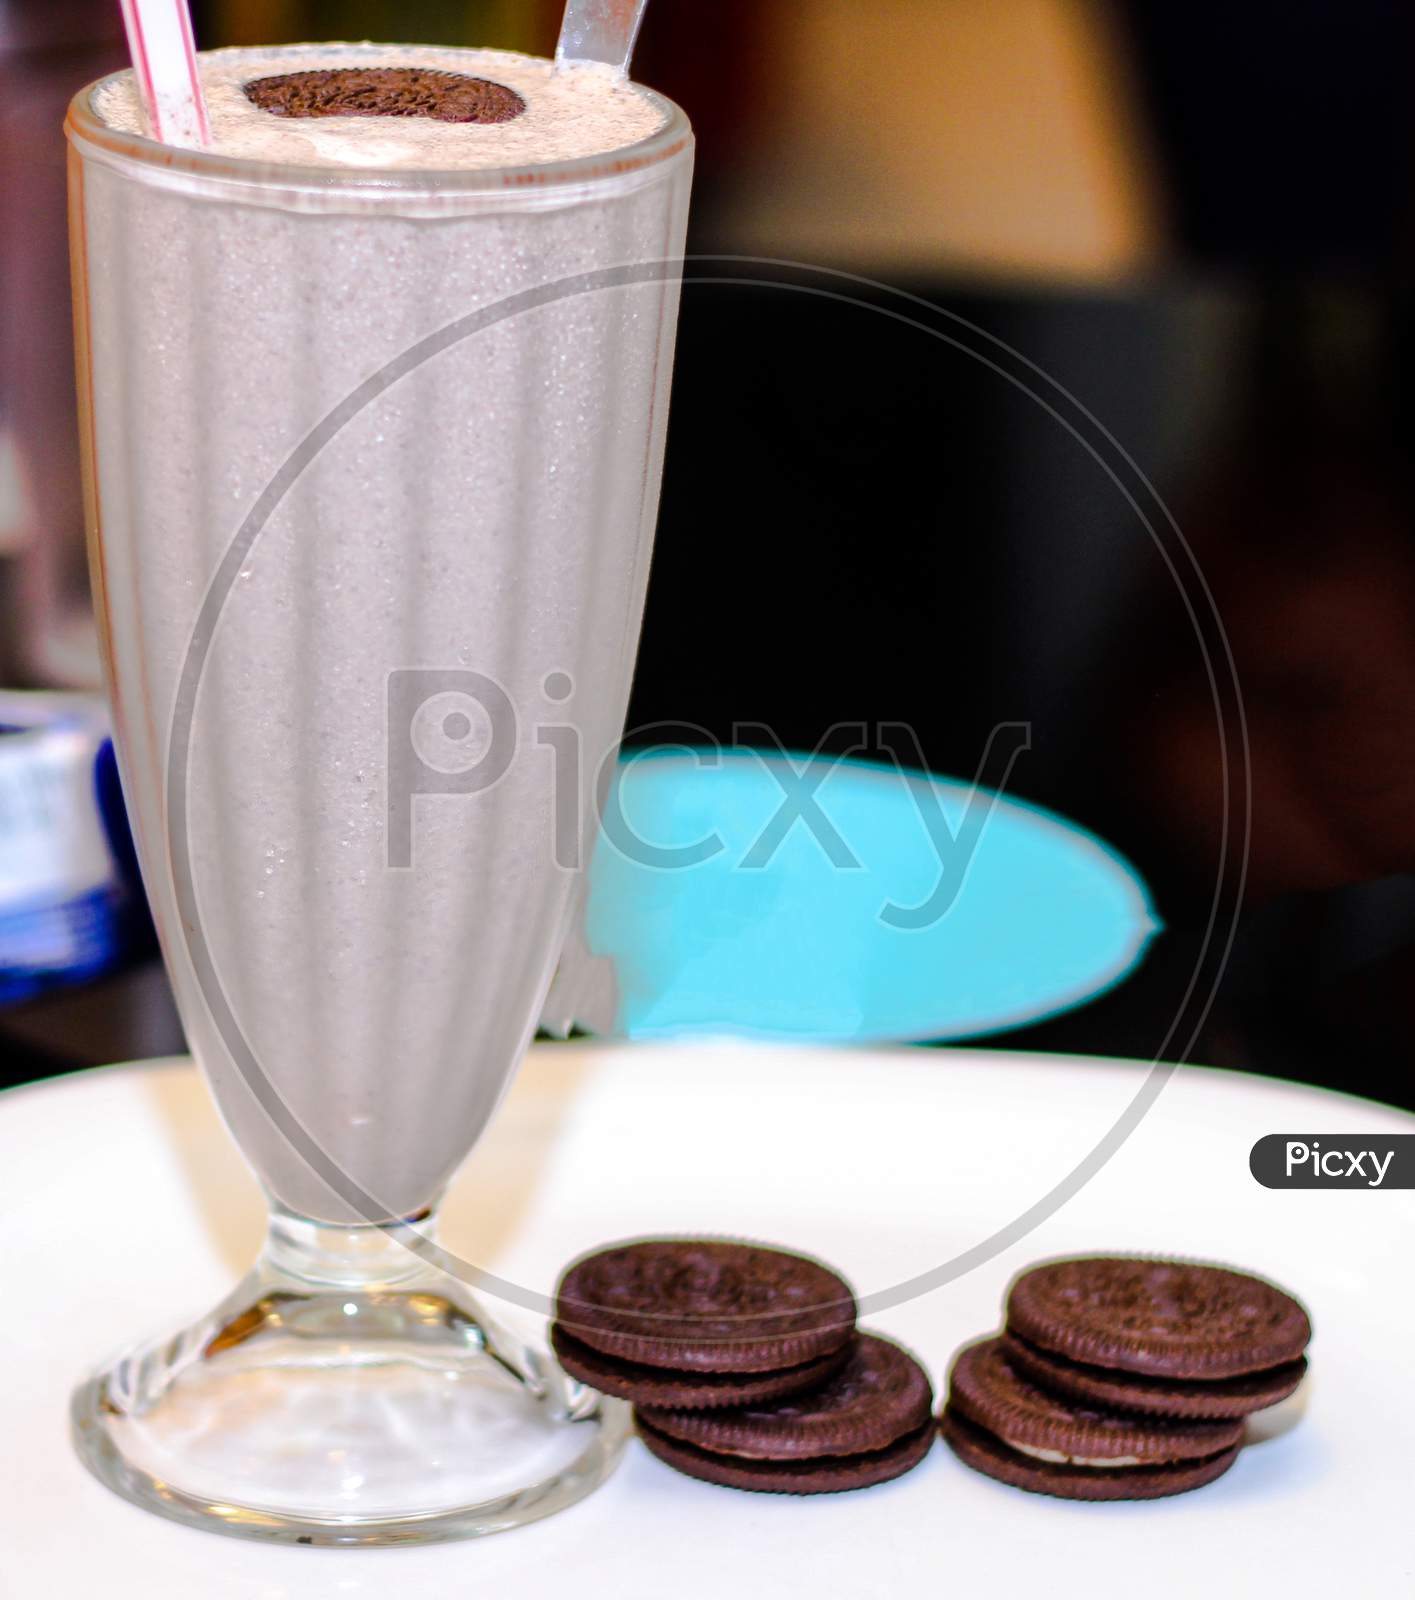 Cold Coffee With Chocolate Cookies With Spread Over White Plate.